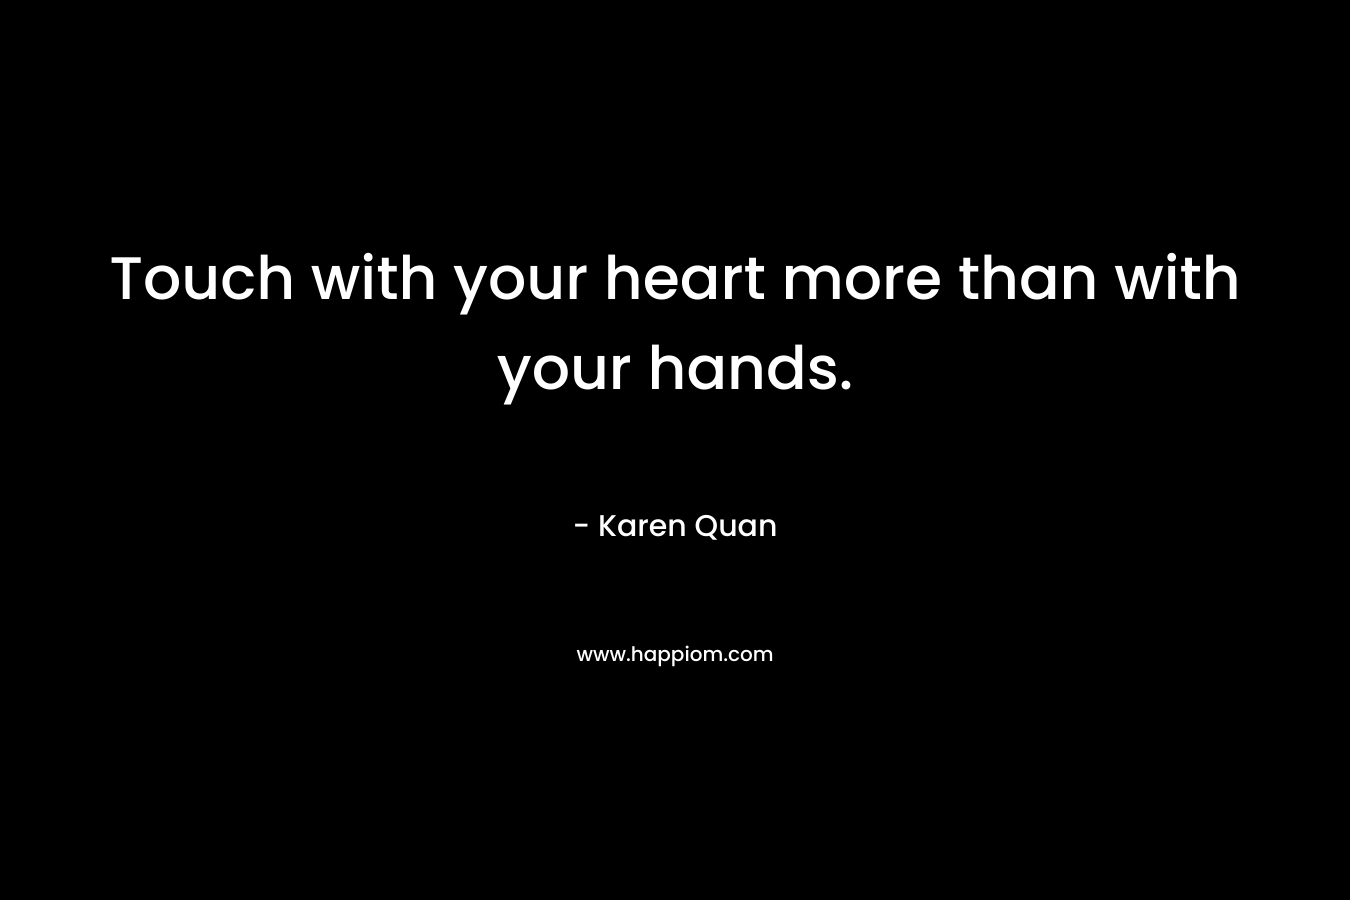 Touch with your heart more than with your hands.